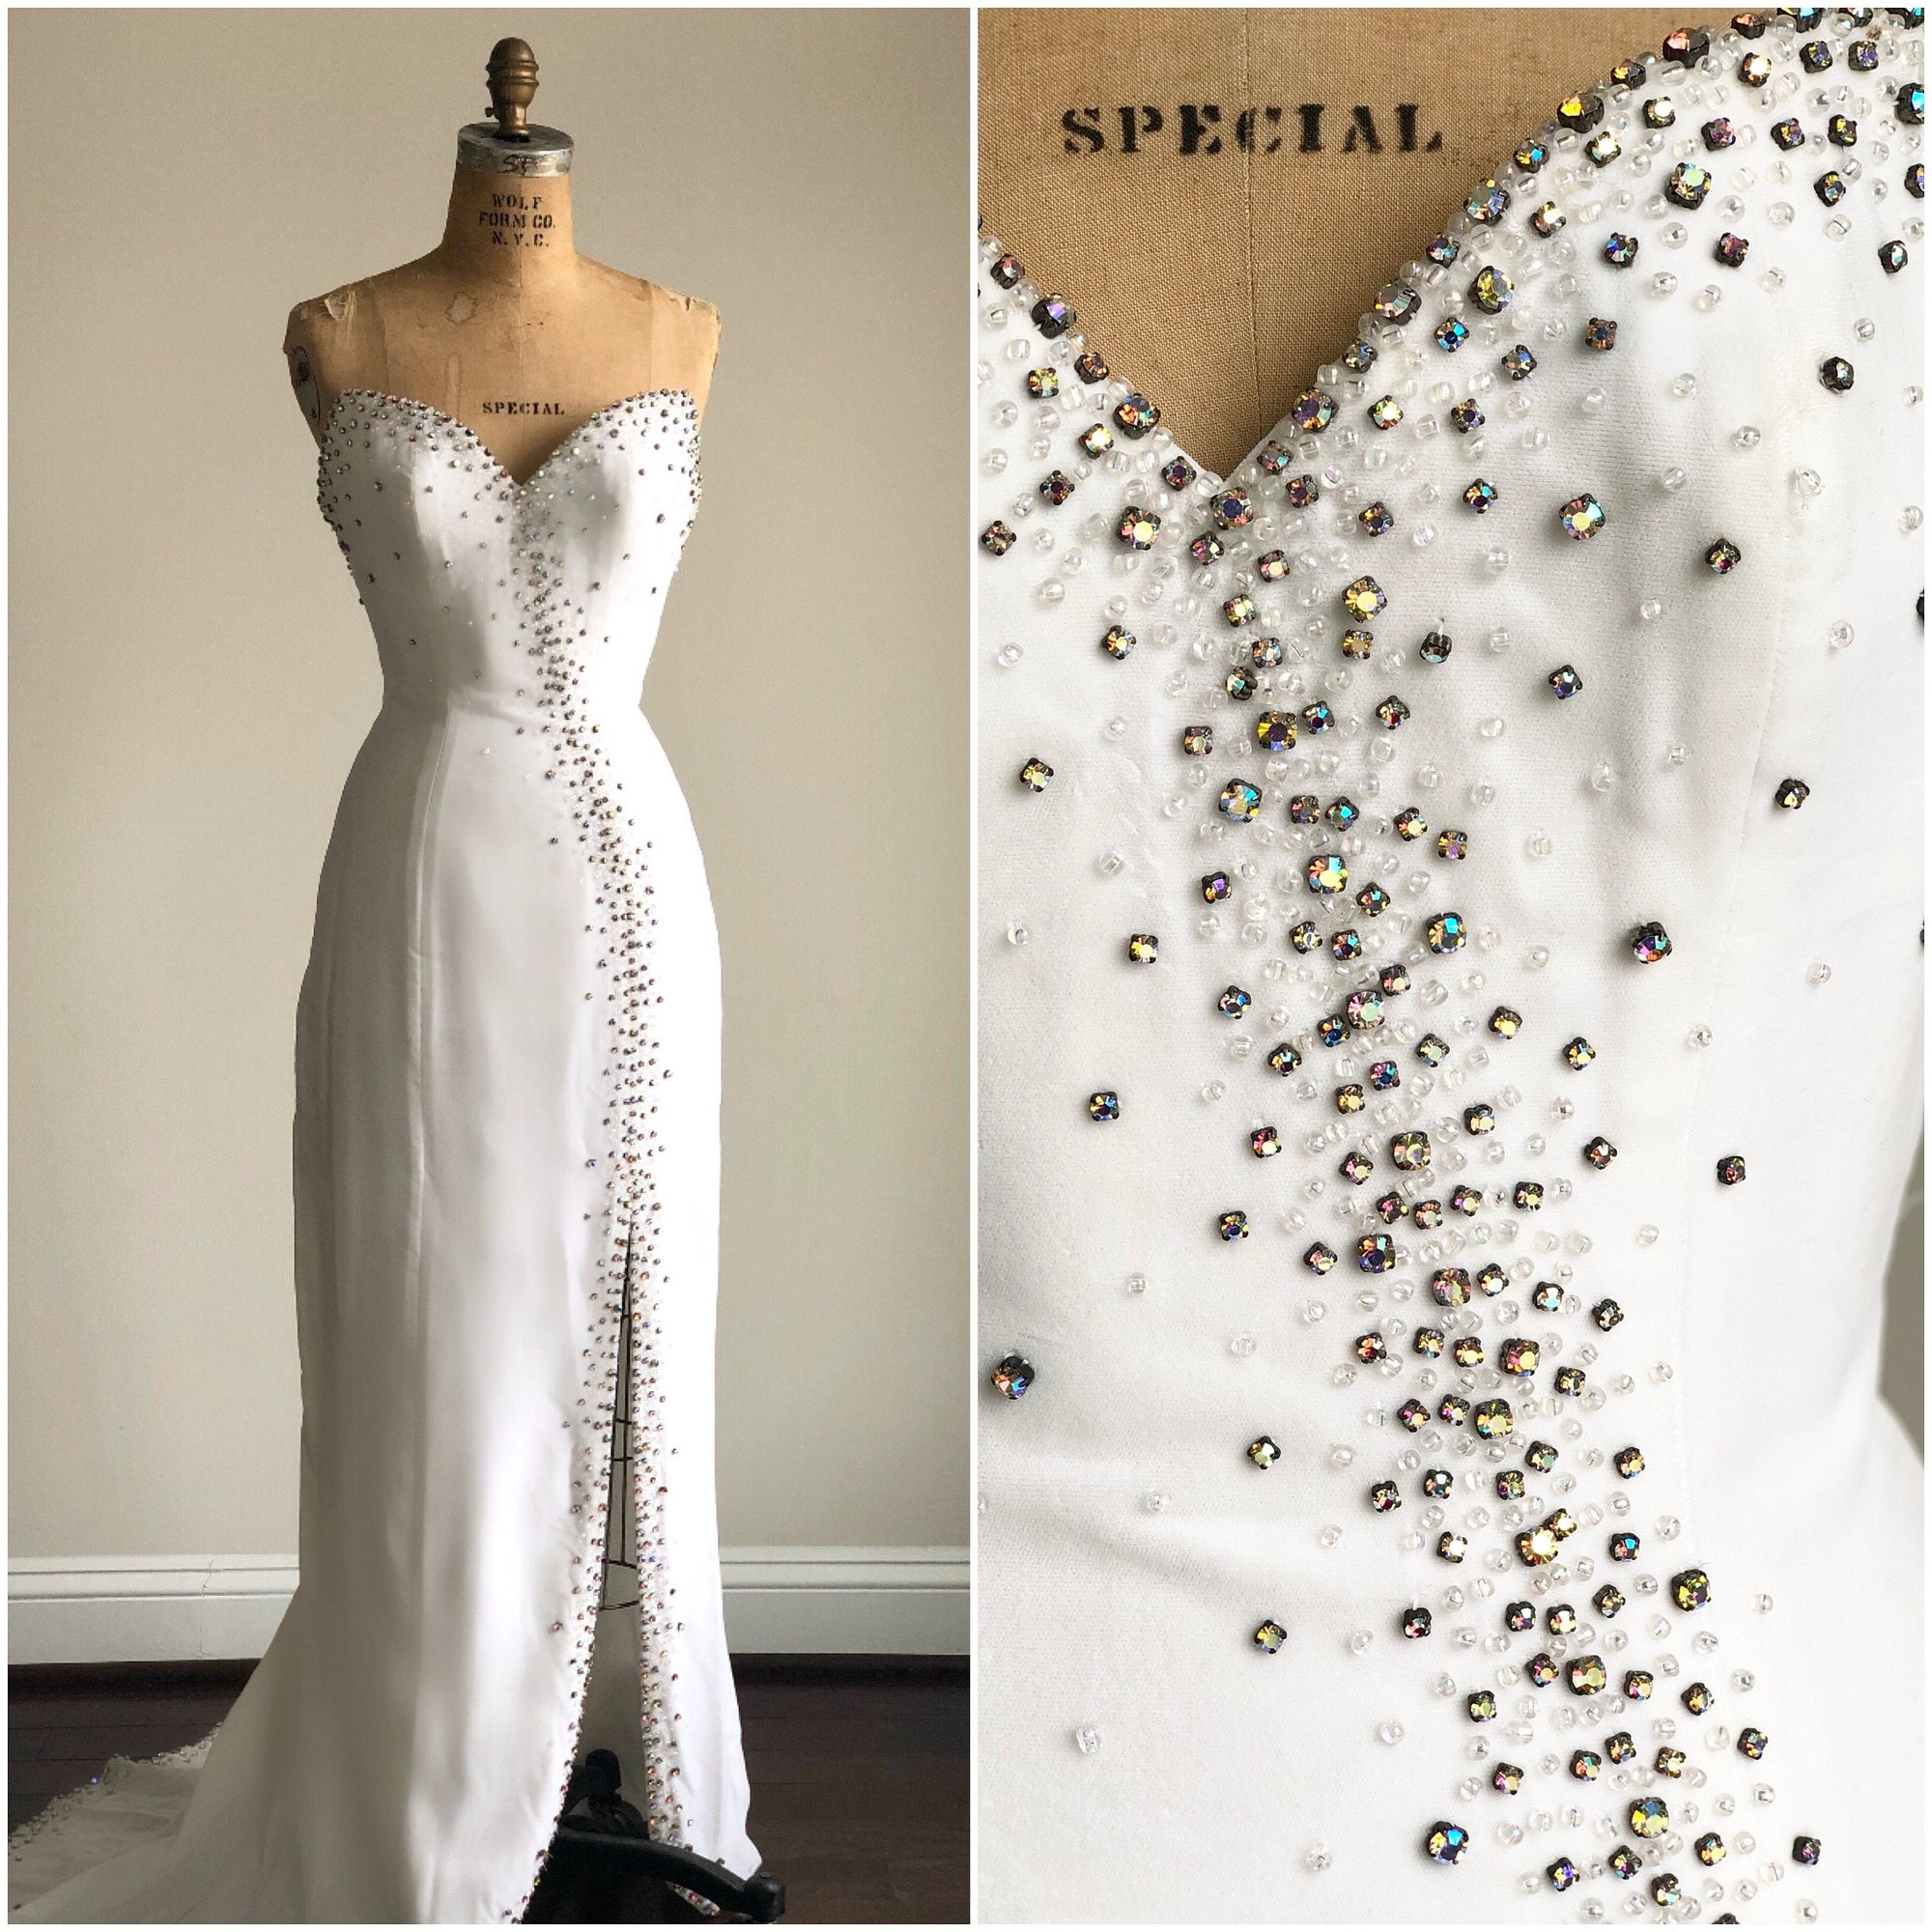 1990s White Velvet Sweetheart Gown with Rhinestones and 100% Silk Lining Size 6 SMALL